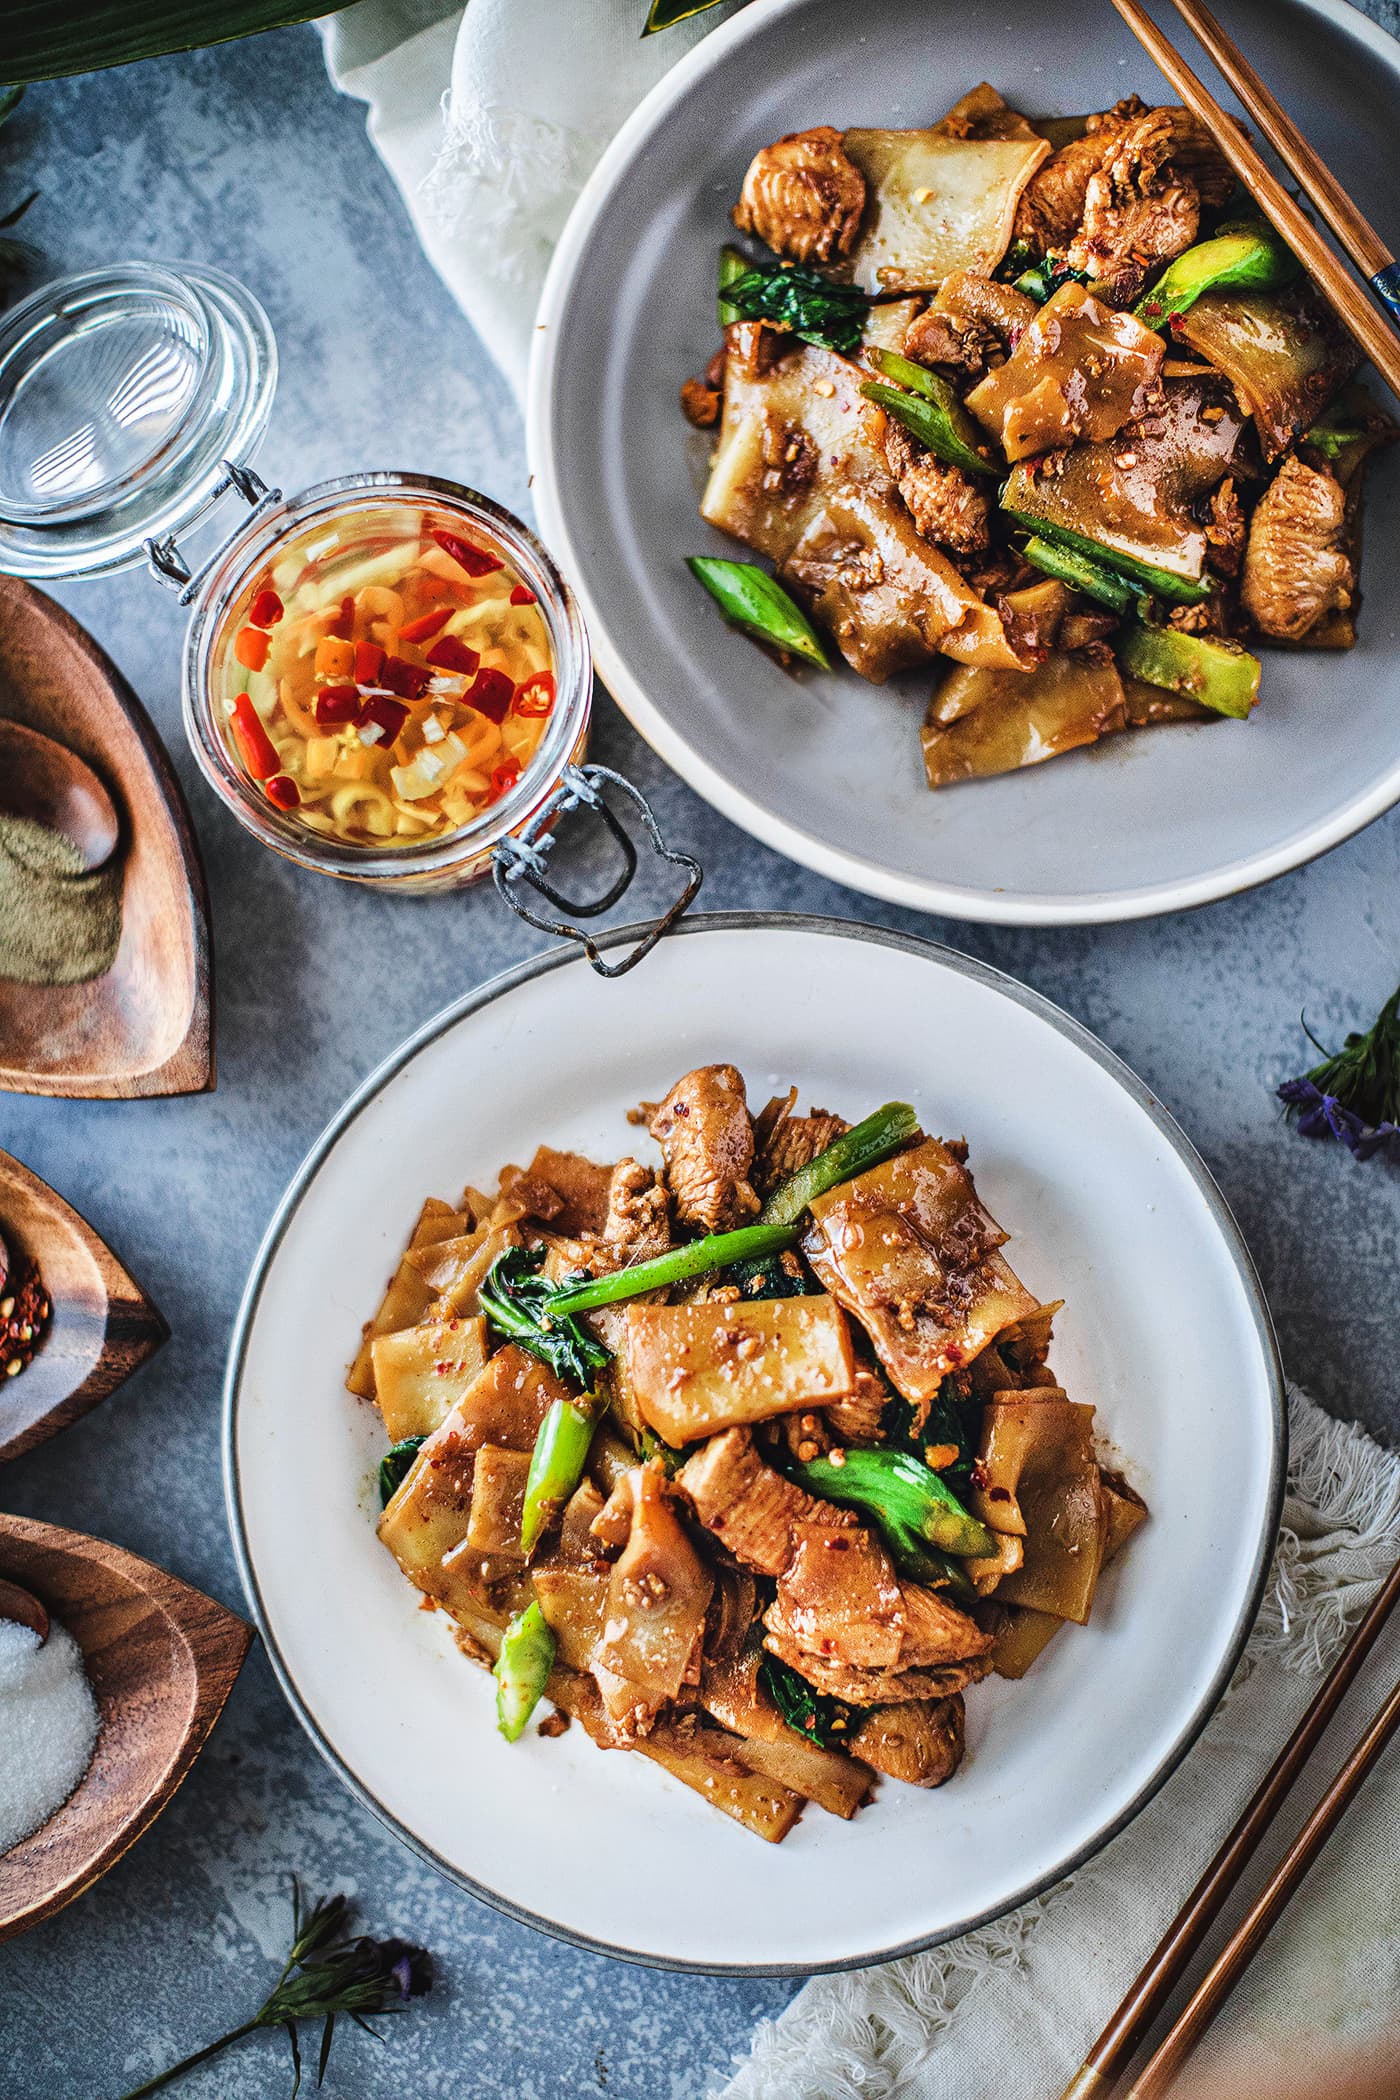 Pad See Ew is one of the most delicious Thai stir fry dishes! It uses wide rice noodles, garlic, eggs, sauces, and Chinese broccoli. This popular street food has a silky and savory flavor from the use of Thai sauces, making this Pad See Ew recipe delightfully memorable. #padseeew #thaifood #padseeewrecipe #senyai 